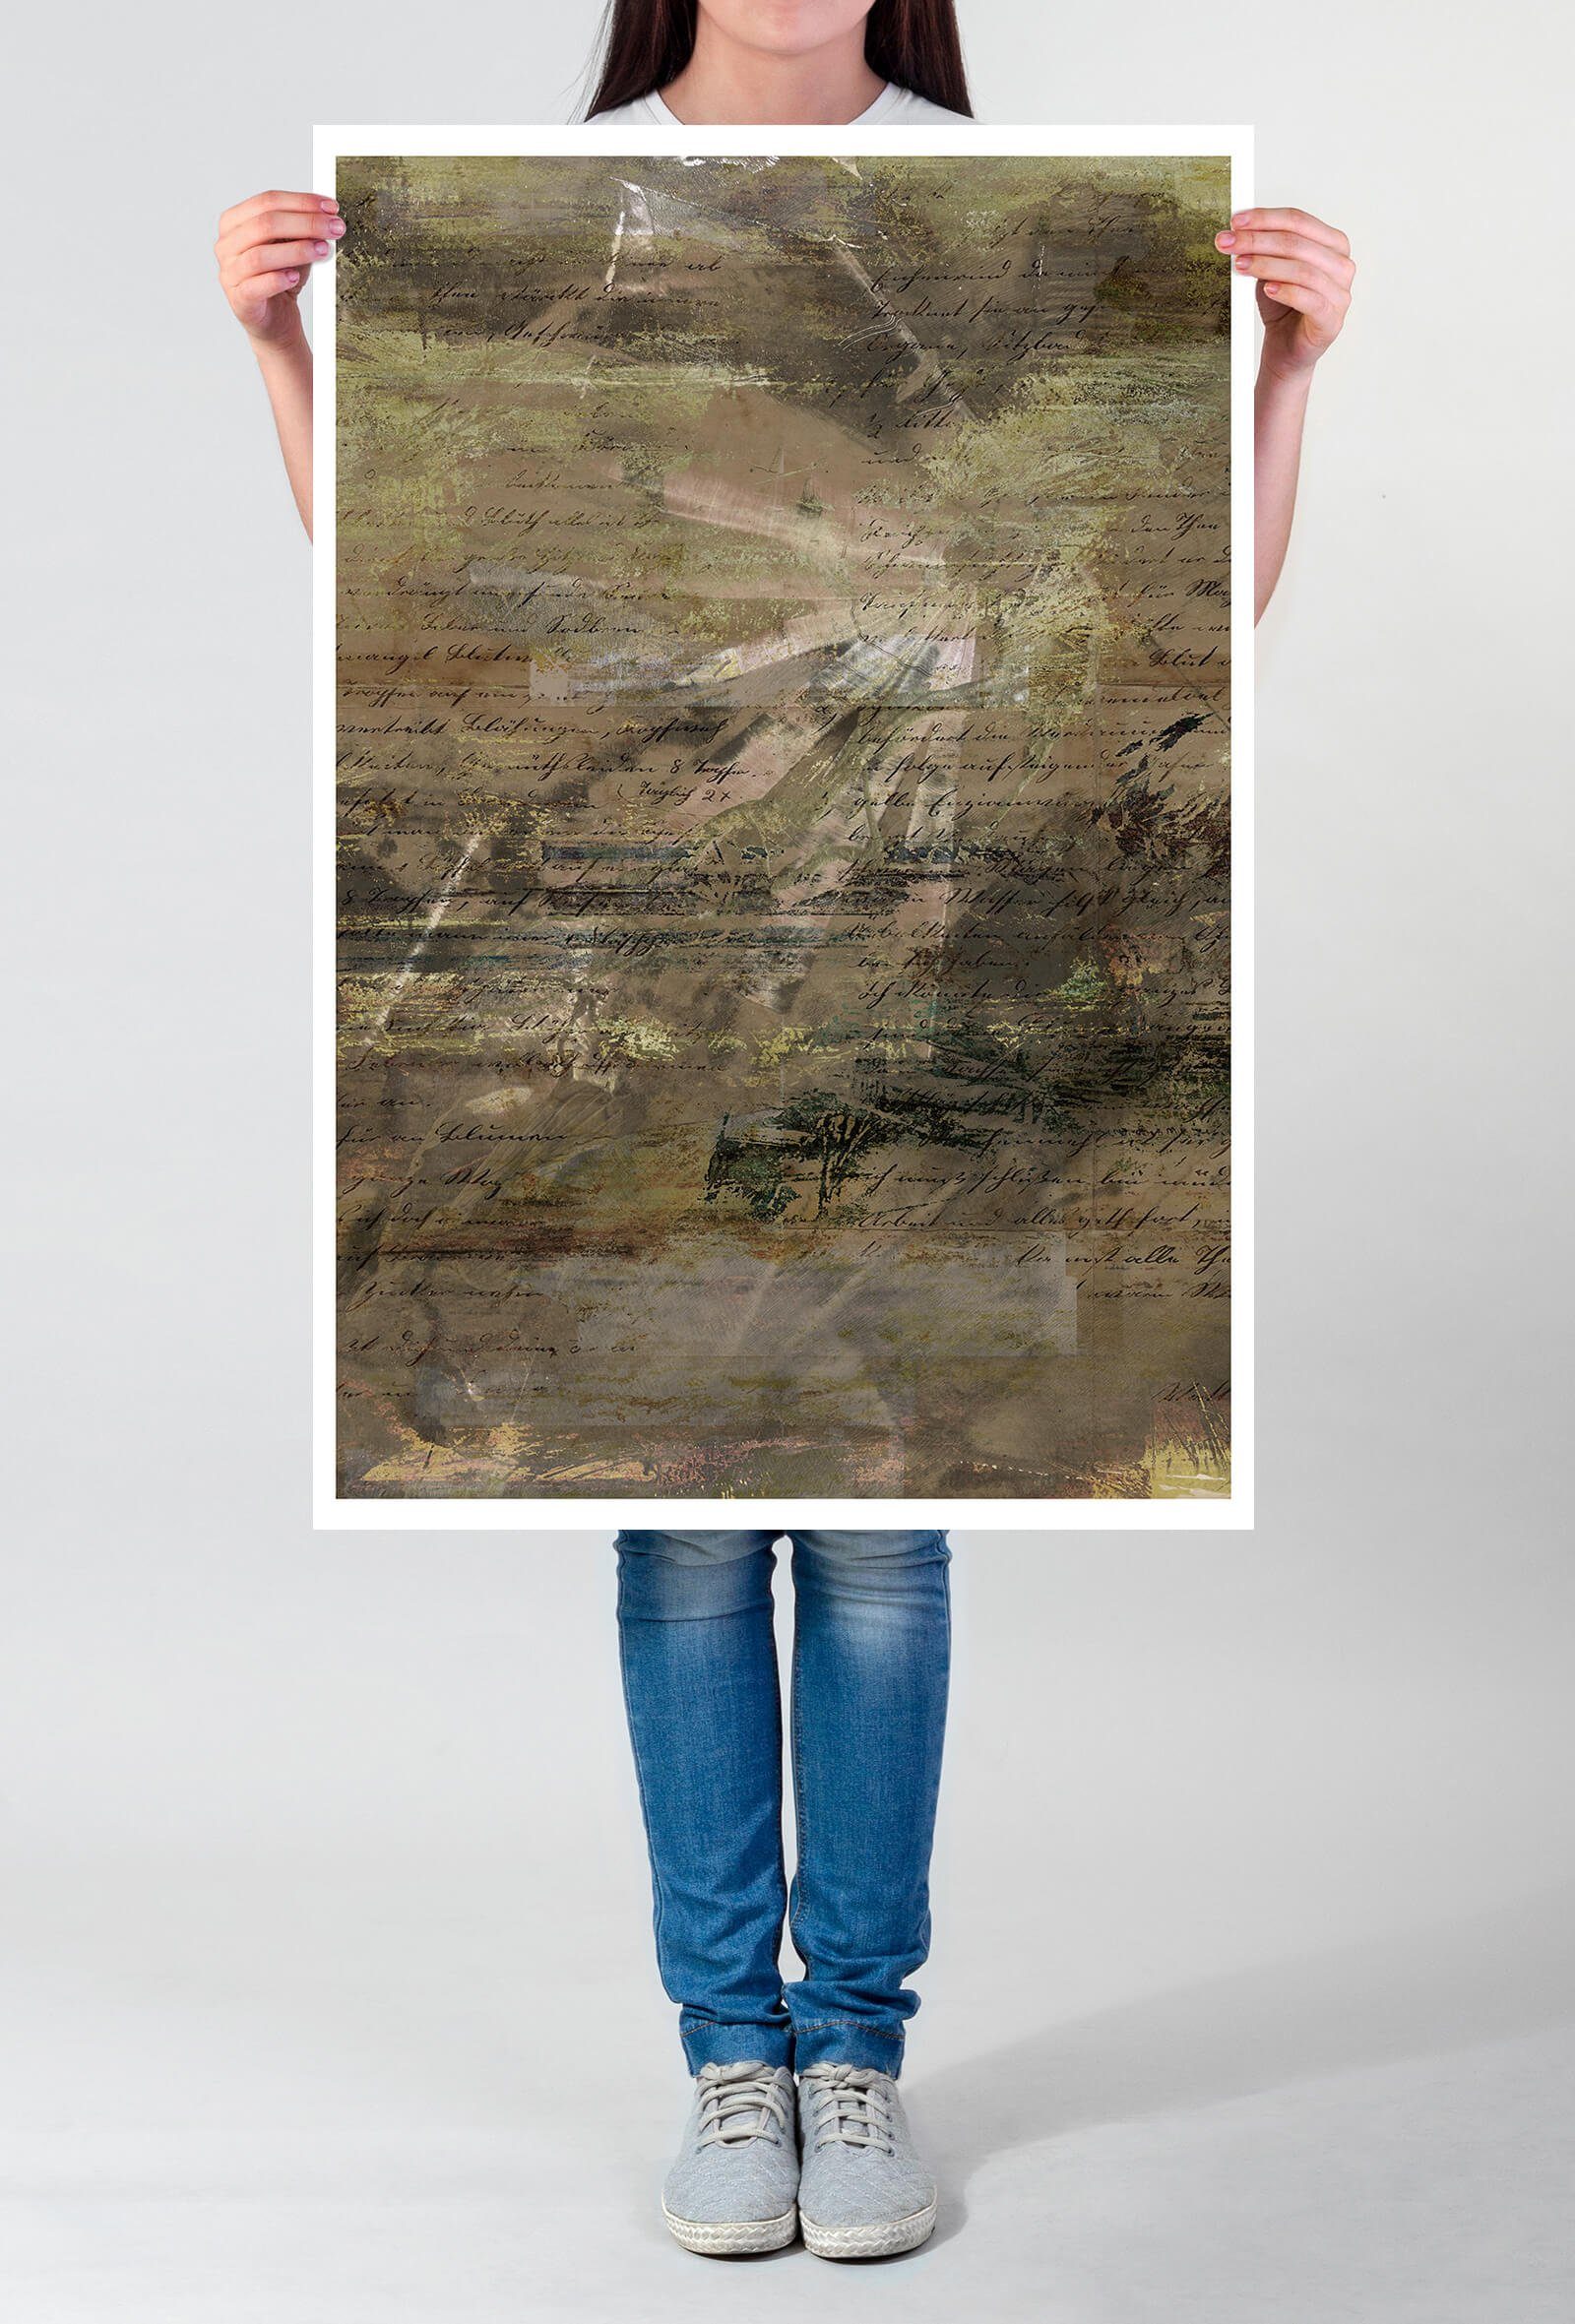 Sinus Art Poster What's My Name? - Poster 60x90cm